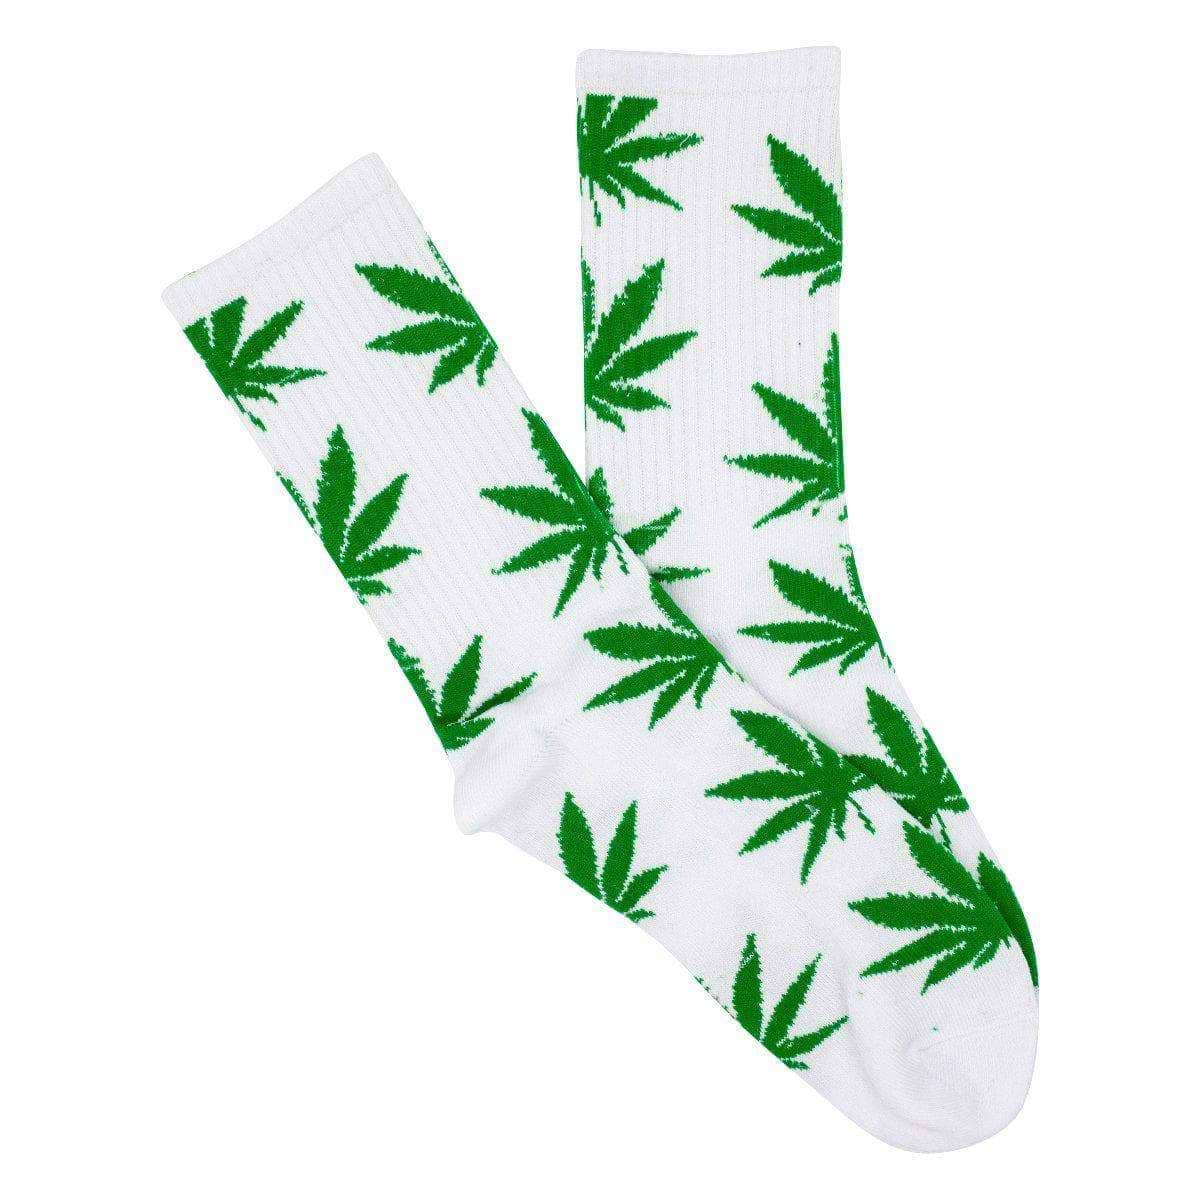 white Stylish two-piece adult socks with a clean look and funky green weed leaf design